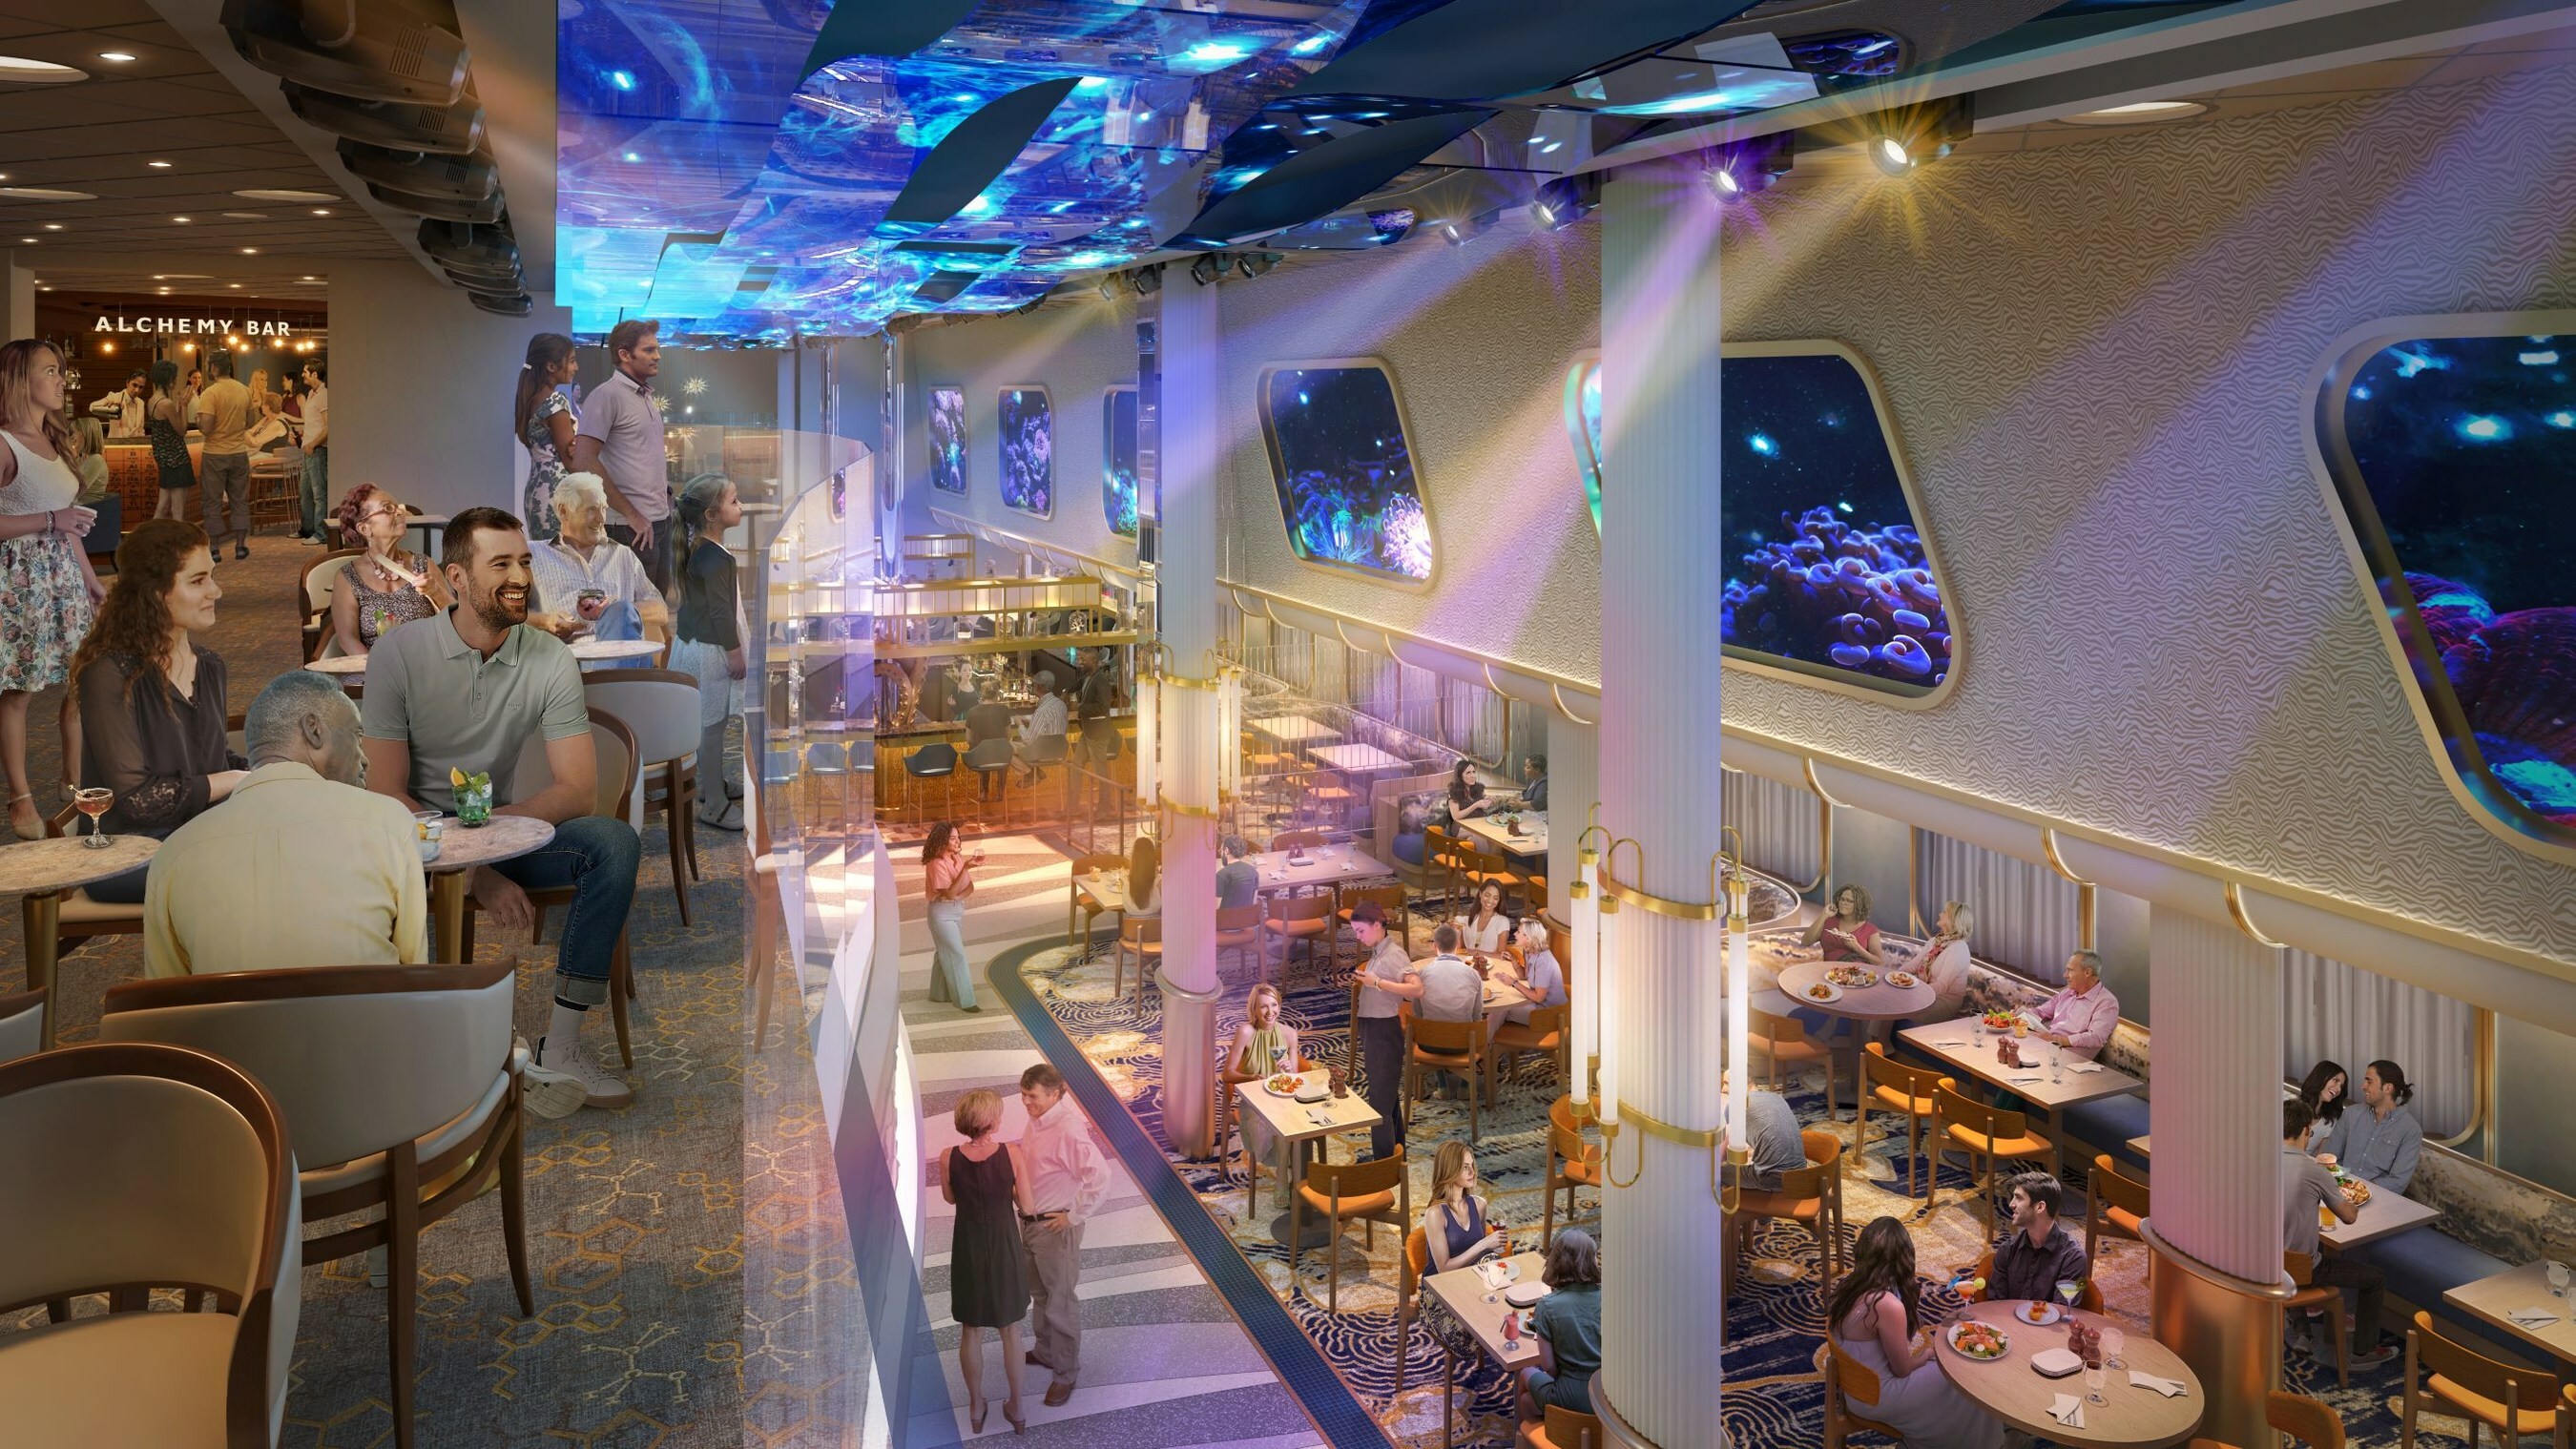 Carnival Jubilee, the next new ship in the Excel class, will debut fun, unique and immersive ocean-themed experiences in two new zones: Currents and The Shores, along with guest favorites and, of course, the fleet's third roller coaster at sea when she debuts later this year (Image at LateCruiseNews.com - April 2023)